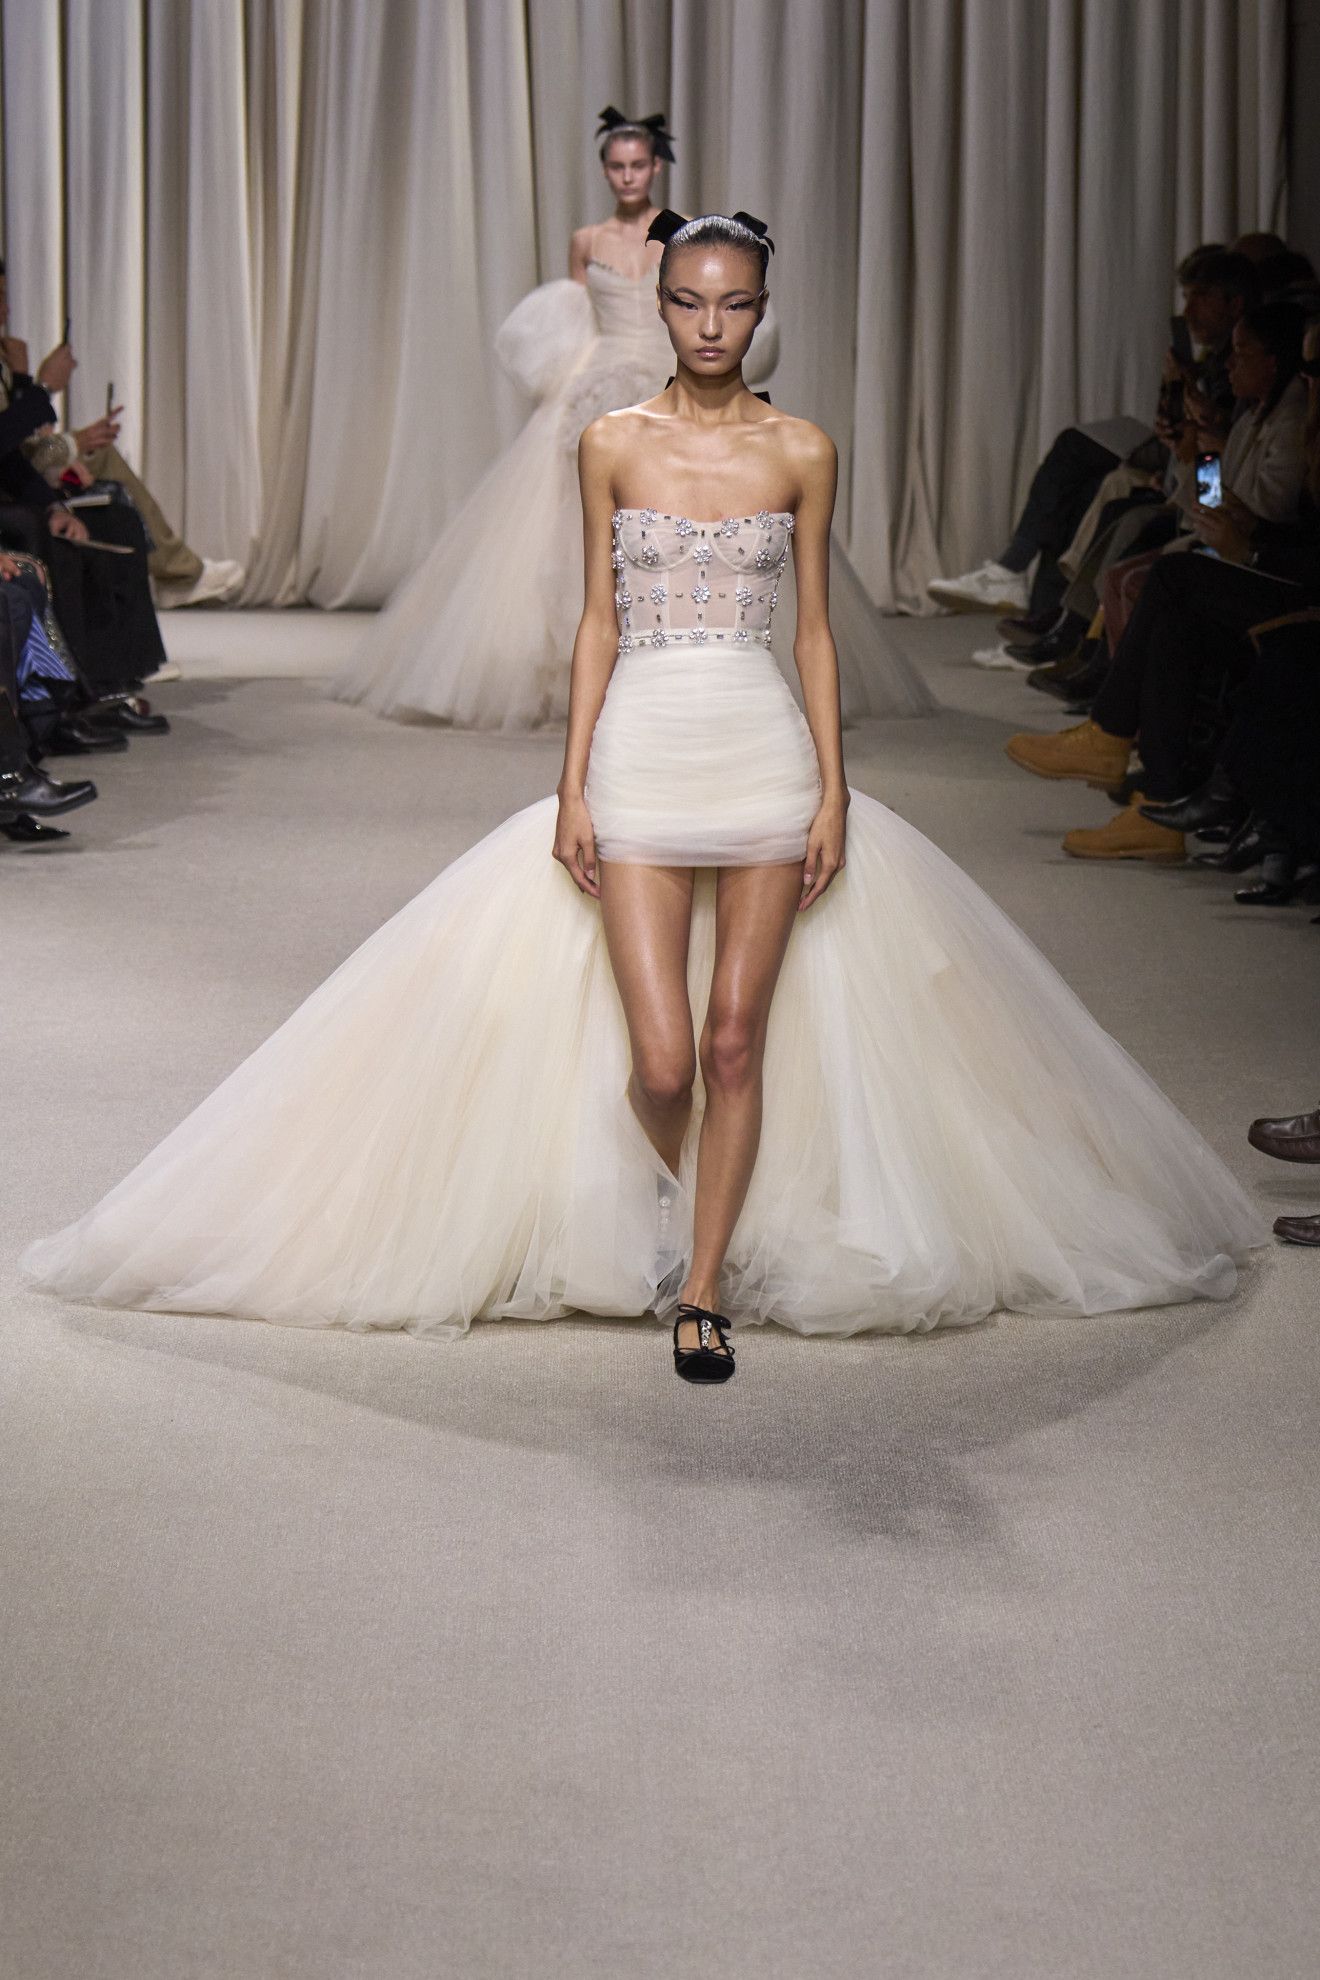 Brand-New Wedding Dresses That Will Be All Over Pinterest | Glamour